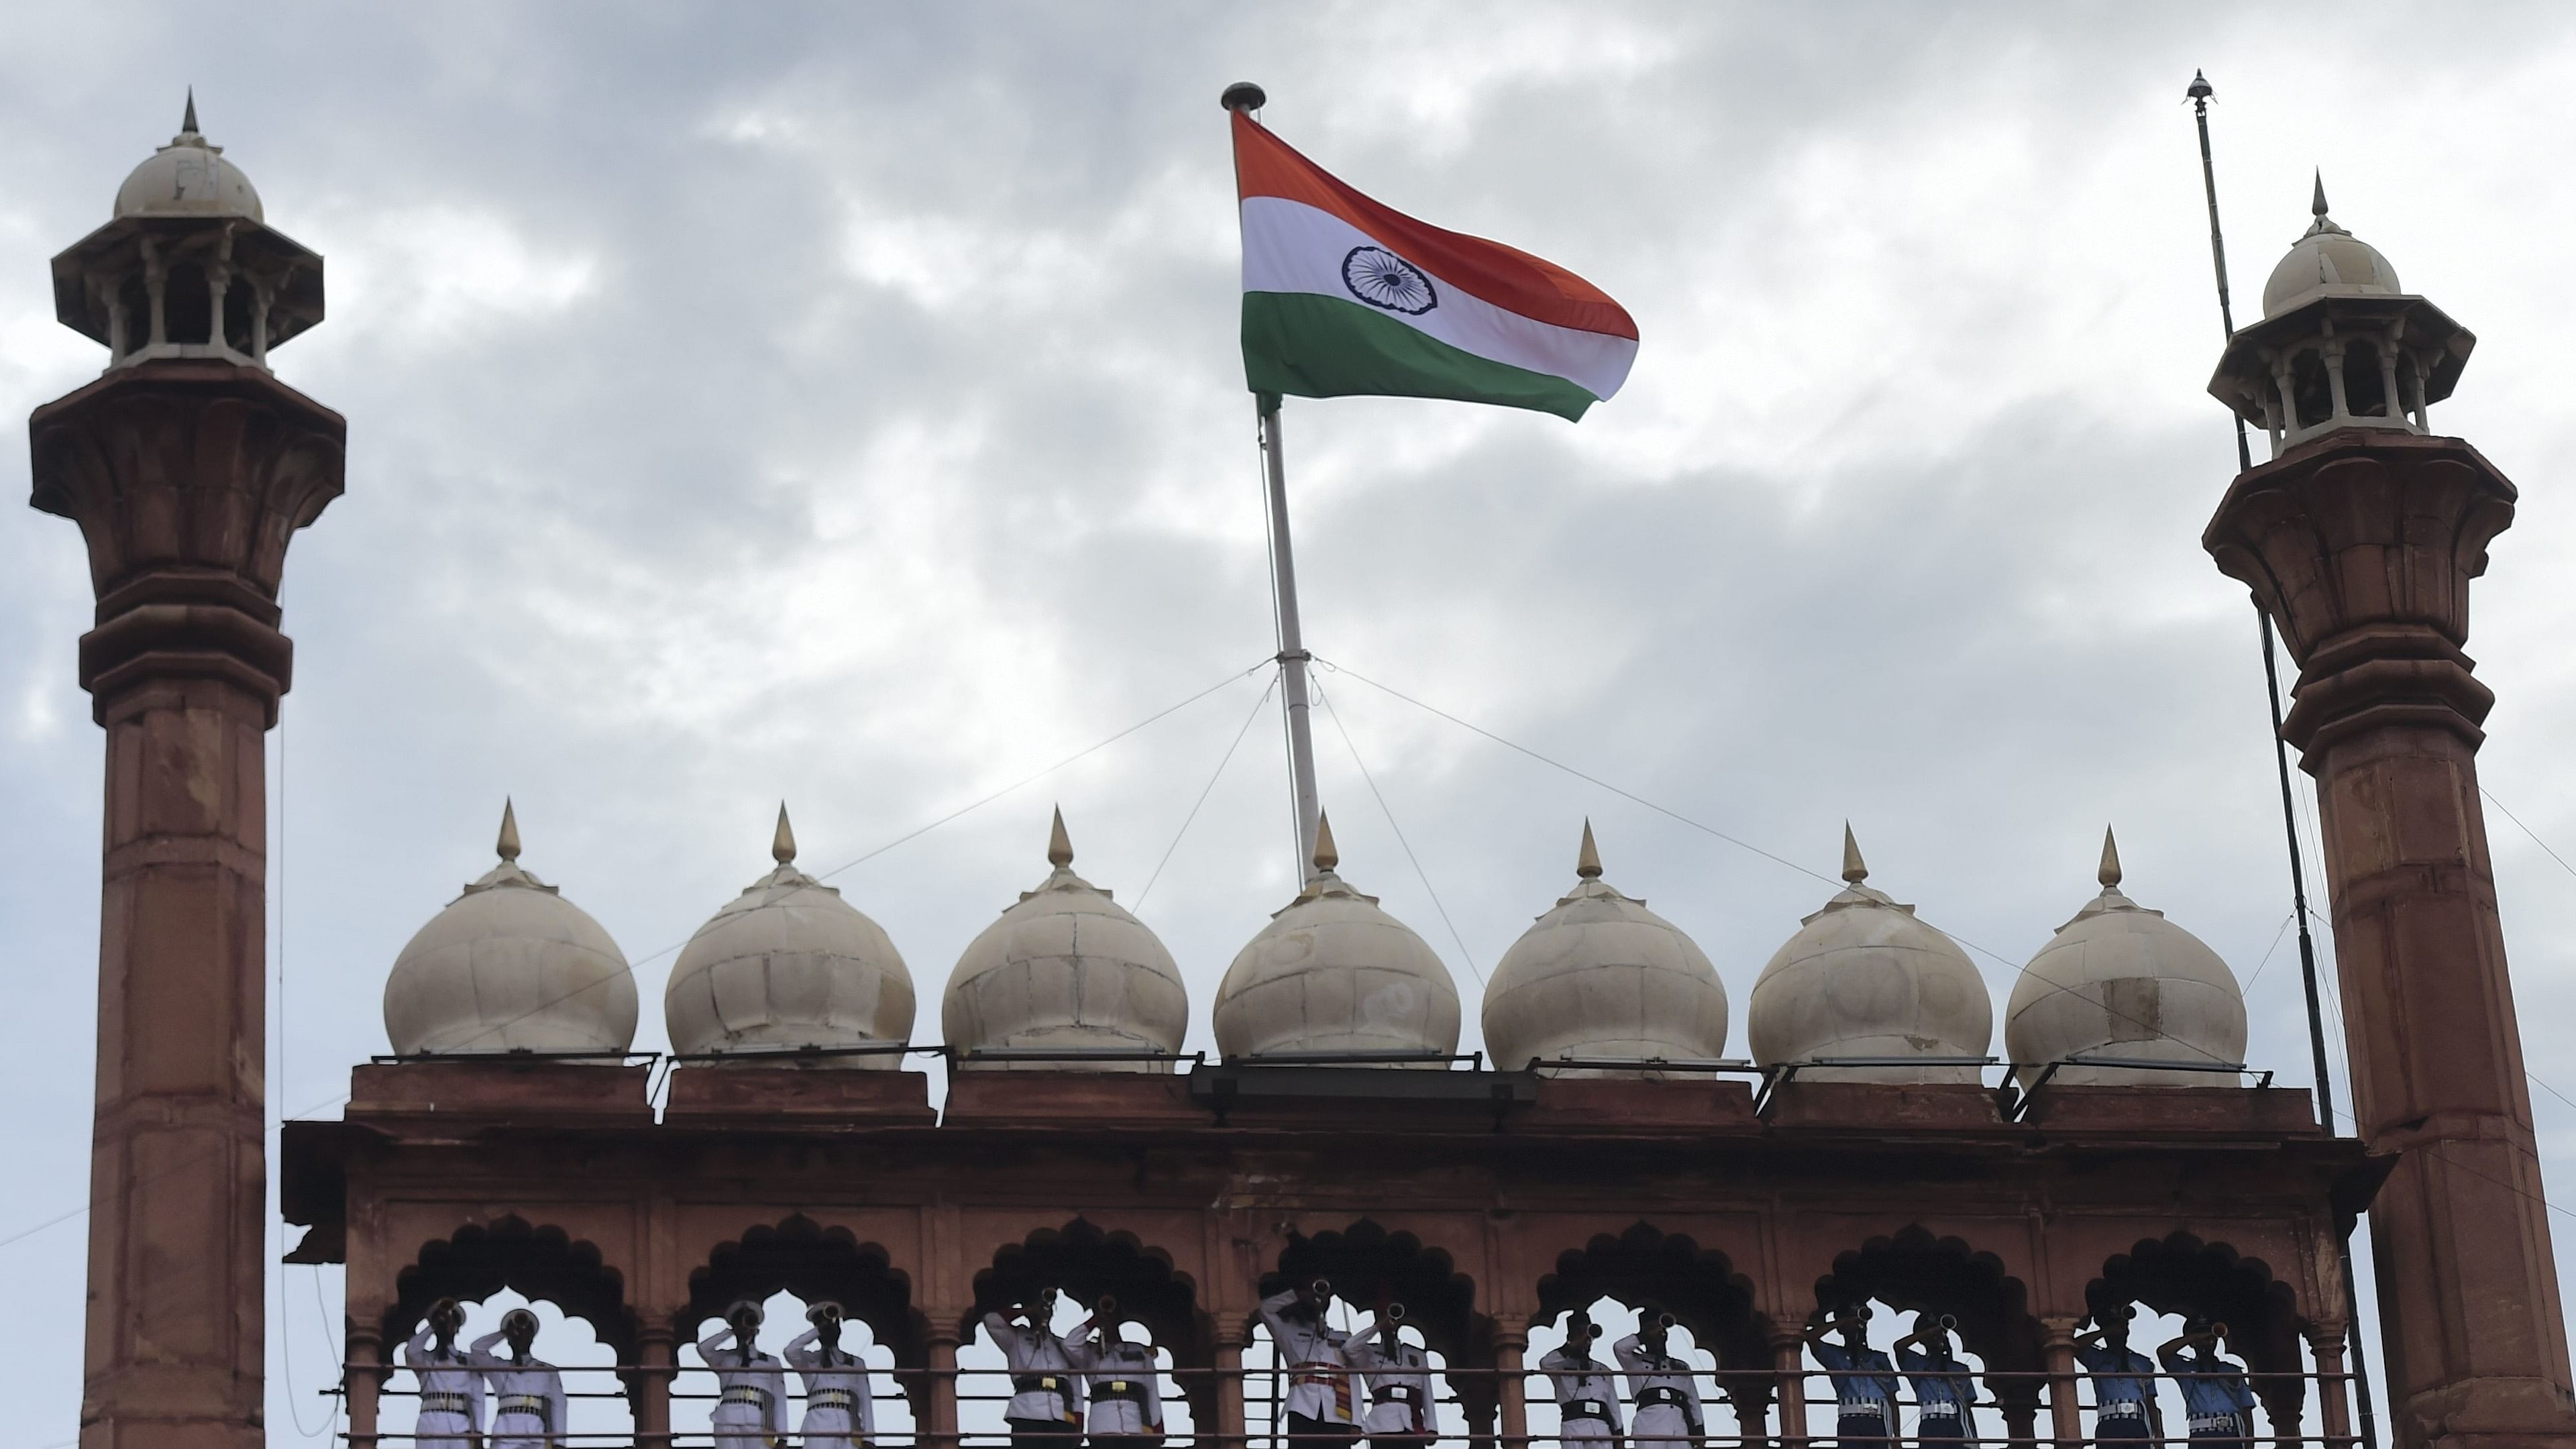 Special measures have been taken at the Red Fort on the occasion of the country's 76th Independence Day to ensure attendees follow Covid-19 protocols. Credit: PTI Photo